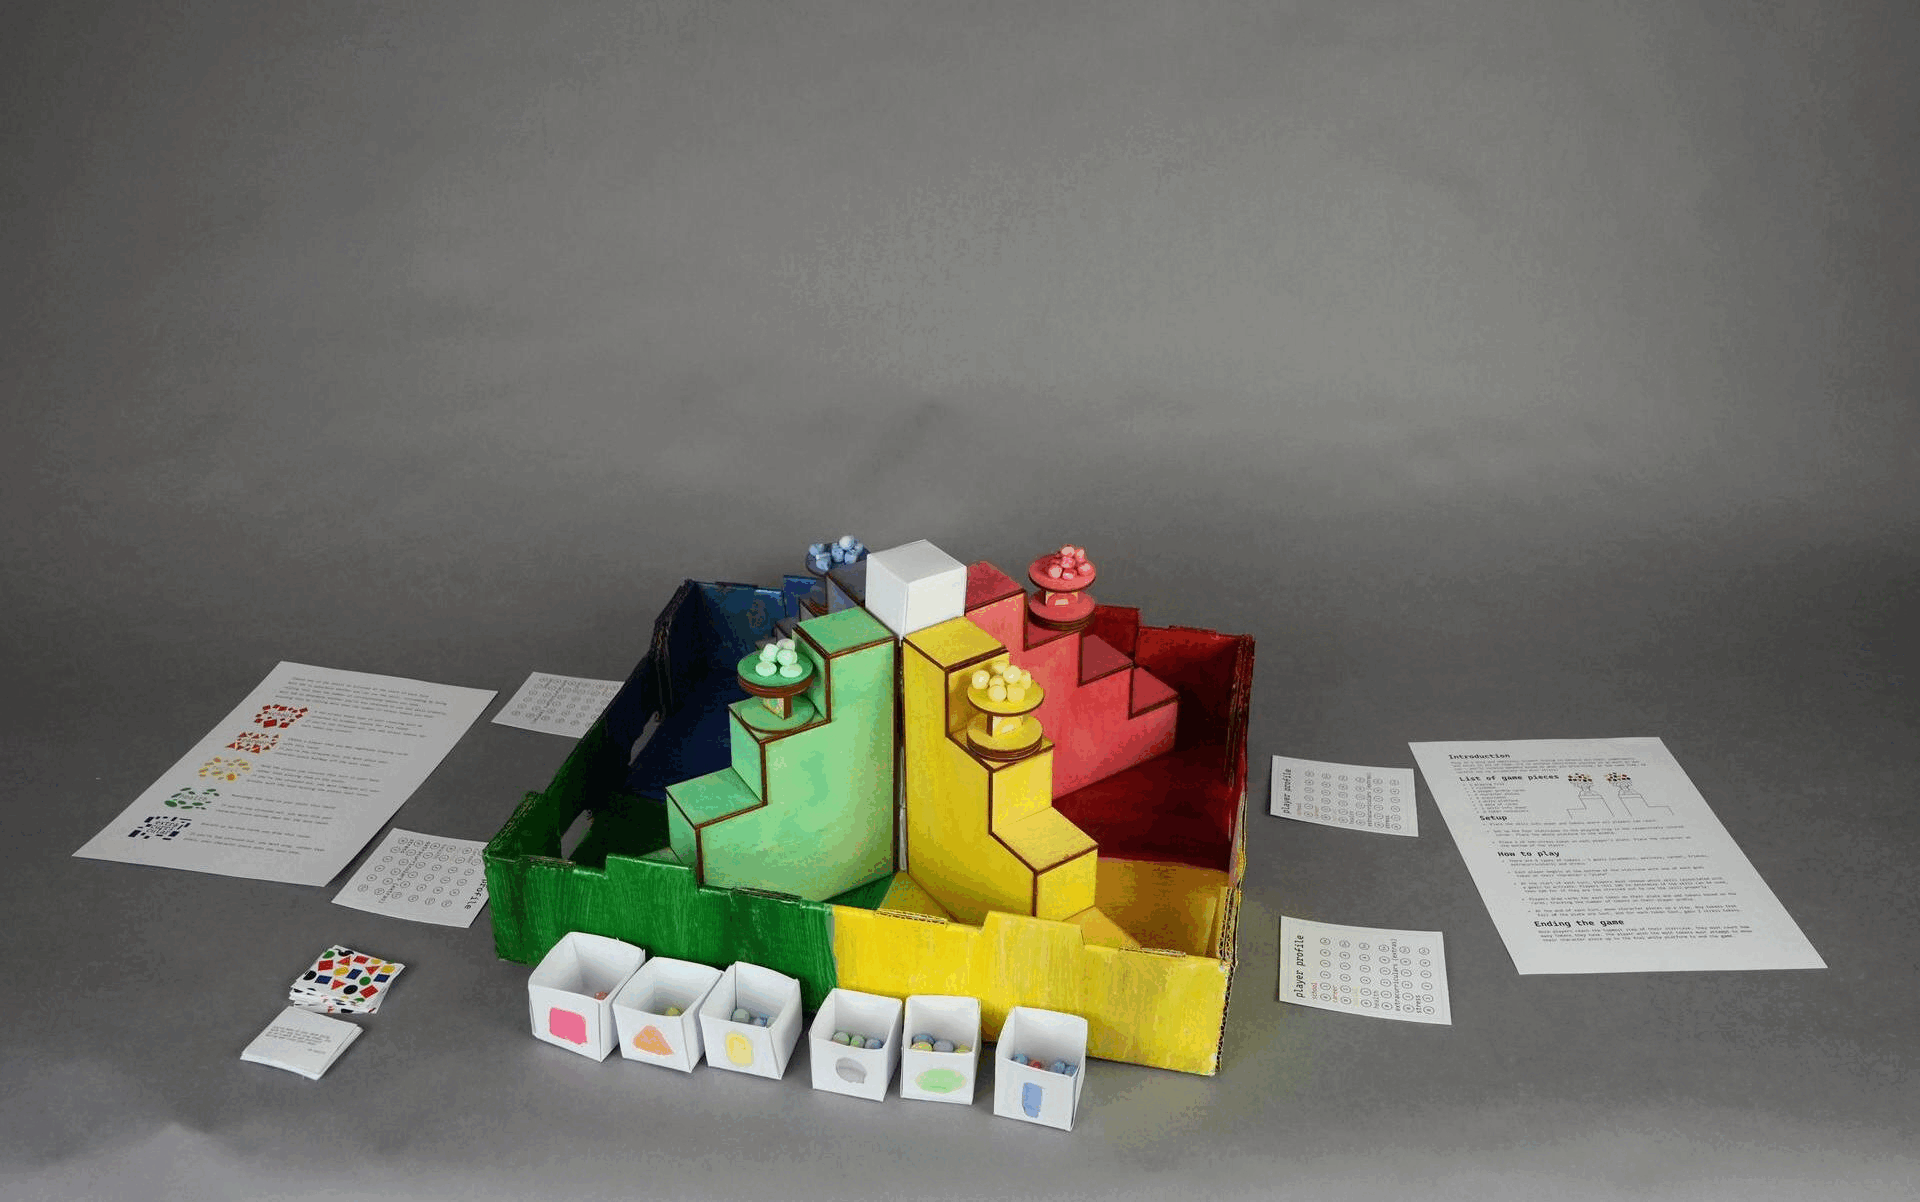 This gif swaps between several photos of a board game. This board game is made up of 4 staircases, colored red, blue, yellow, and green, that converge to a white platform. The character pieces placed on the staircase are students carrying plates, and there are clay tokens of different shapes on their plates.